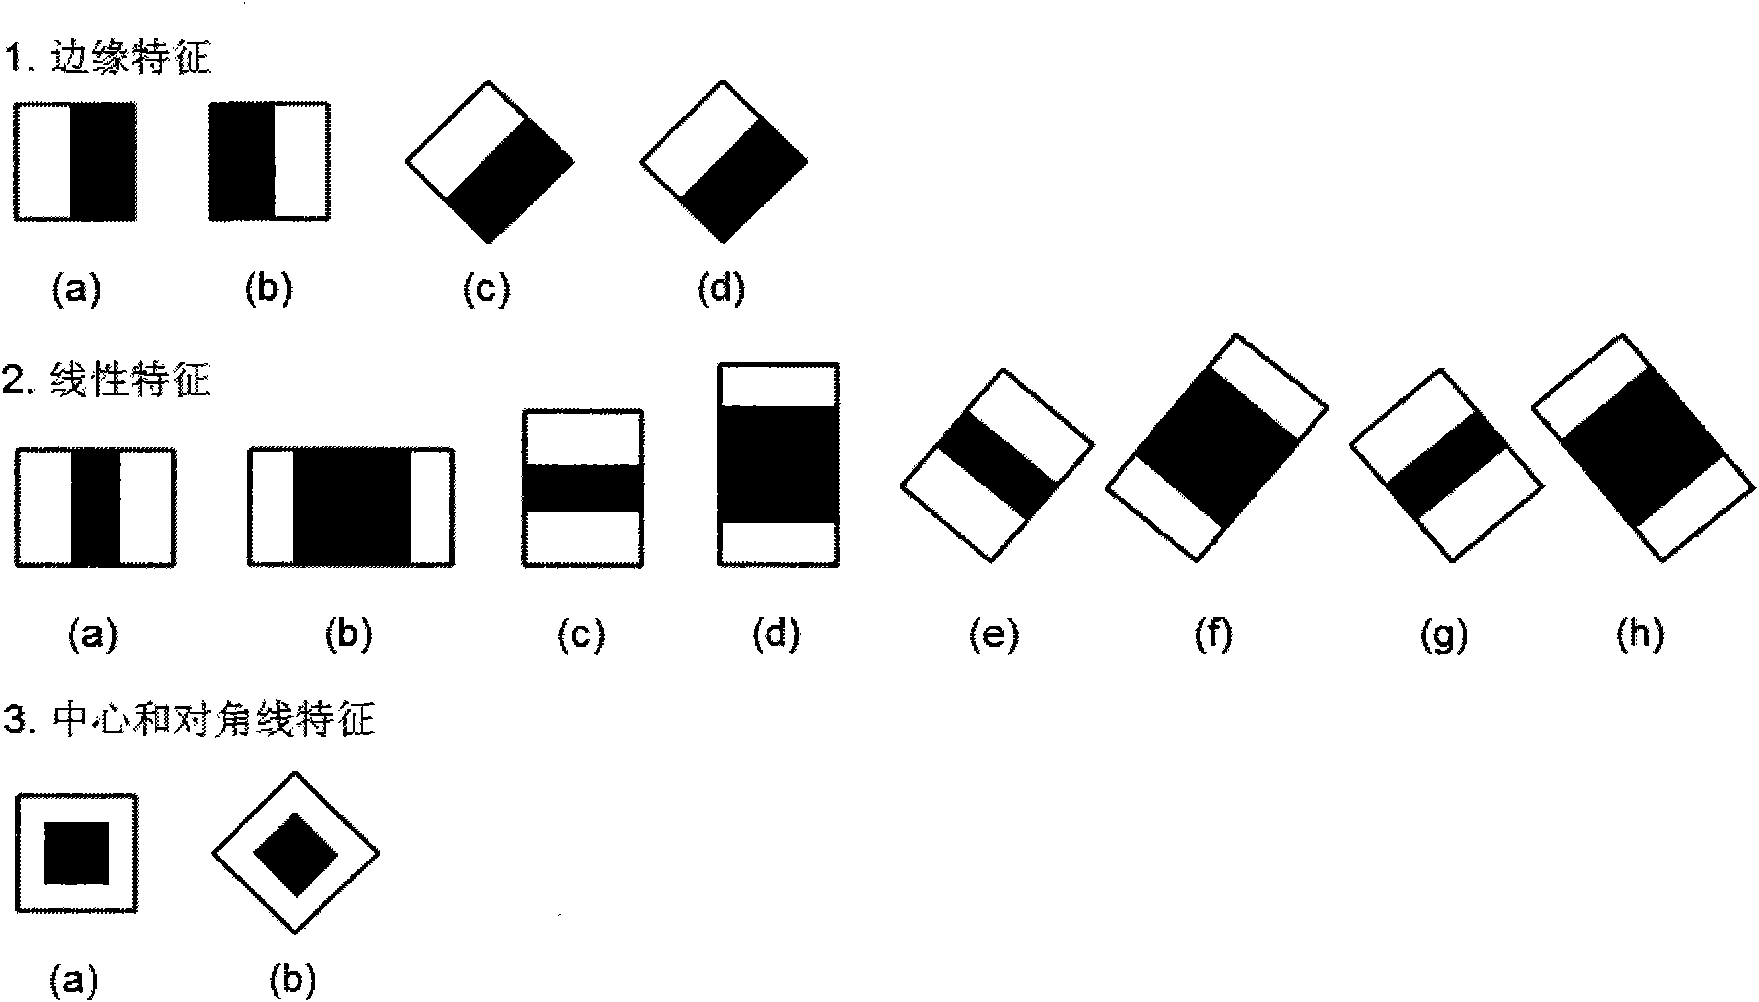 Human eye recognition system and method